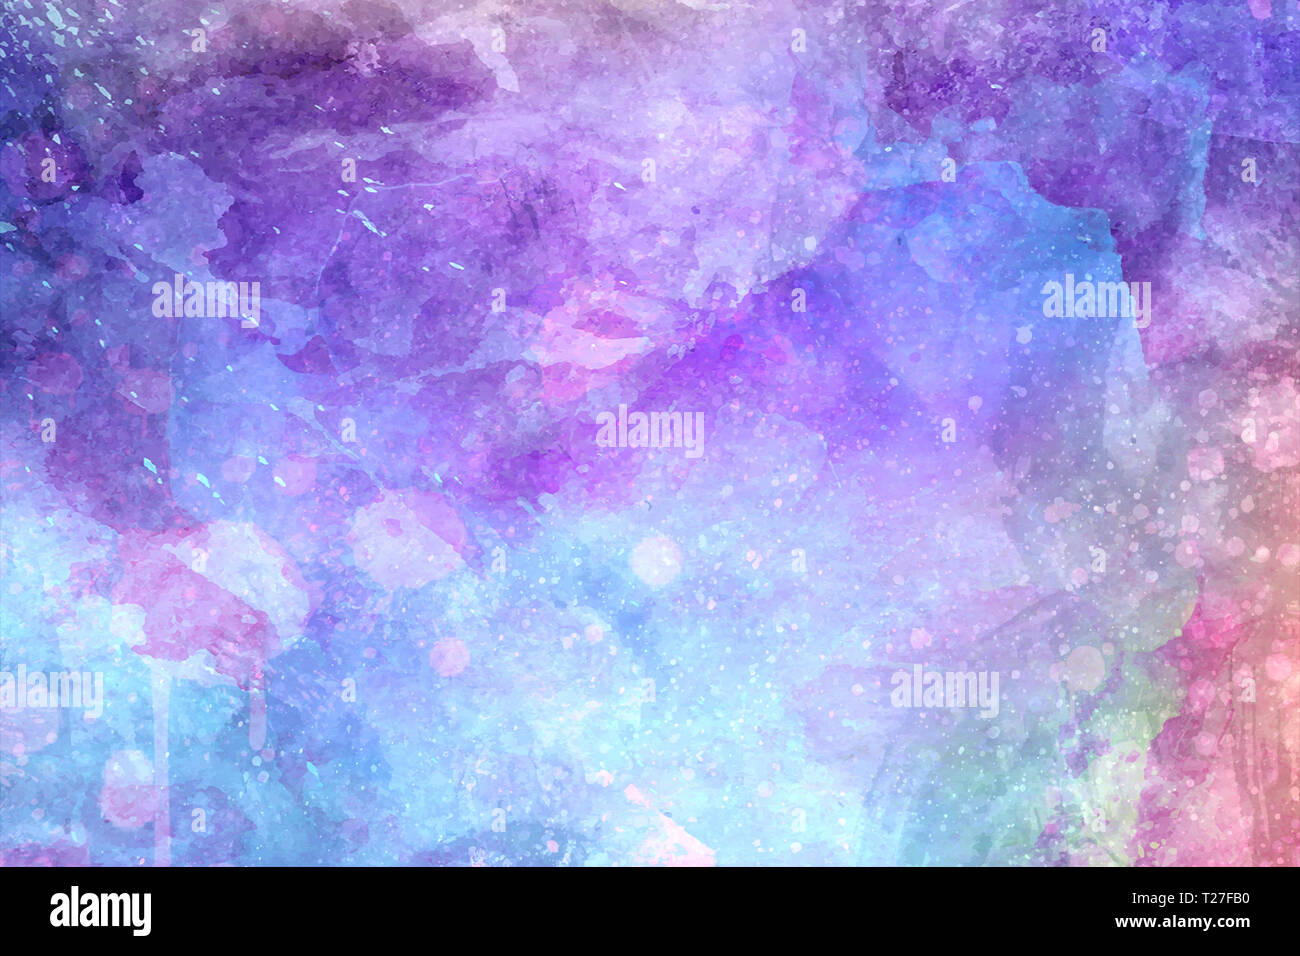 Abstract Artistic Bright Colorful Smooth Galaxy Background Stock